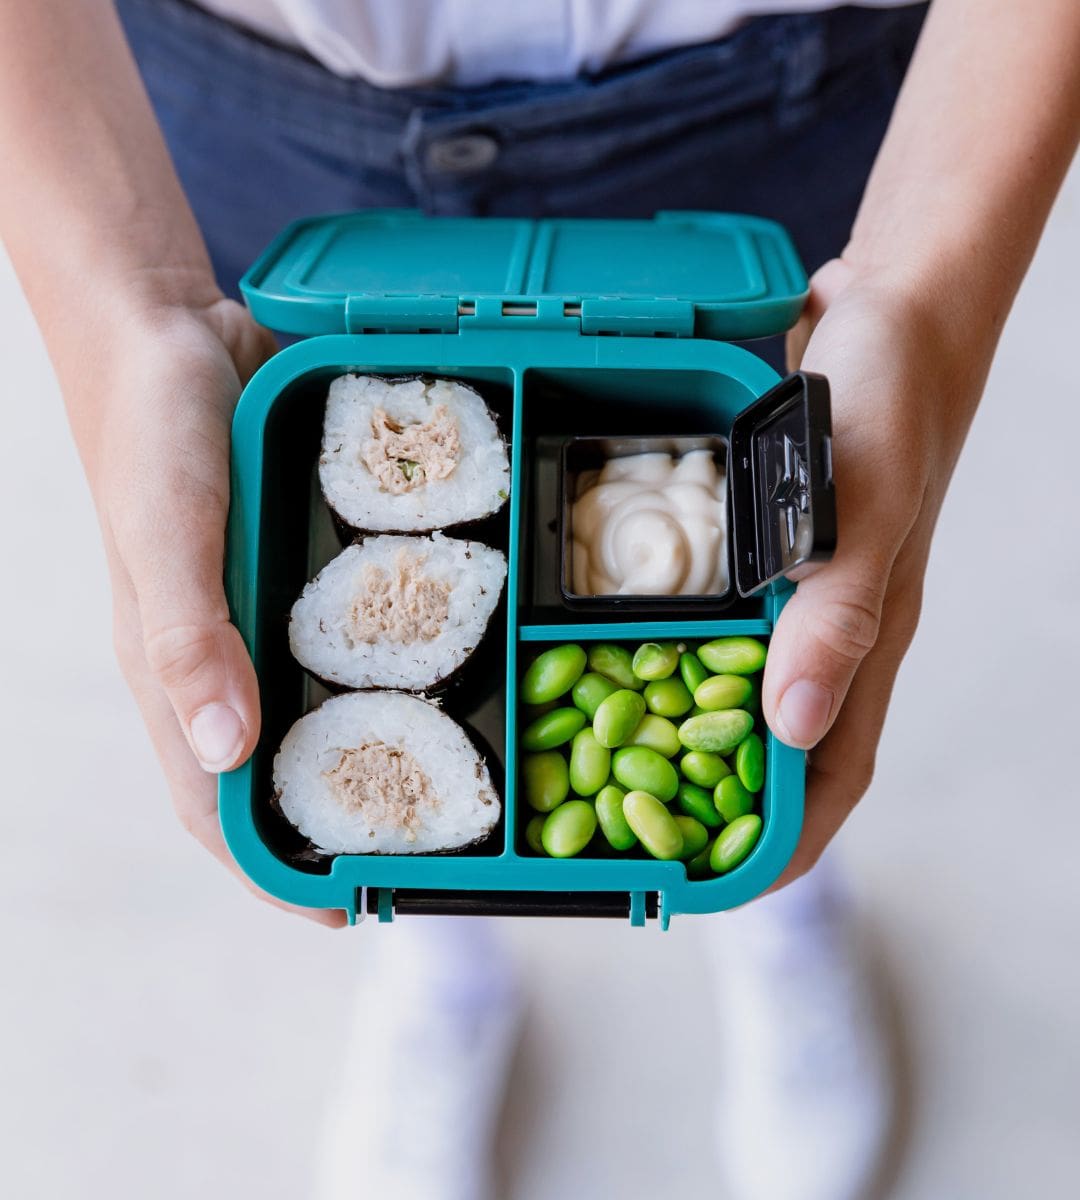 Get back to school ready with MontiiCo Bento Boxes and Bento accessories, with every size to fit every appetite!